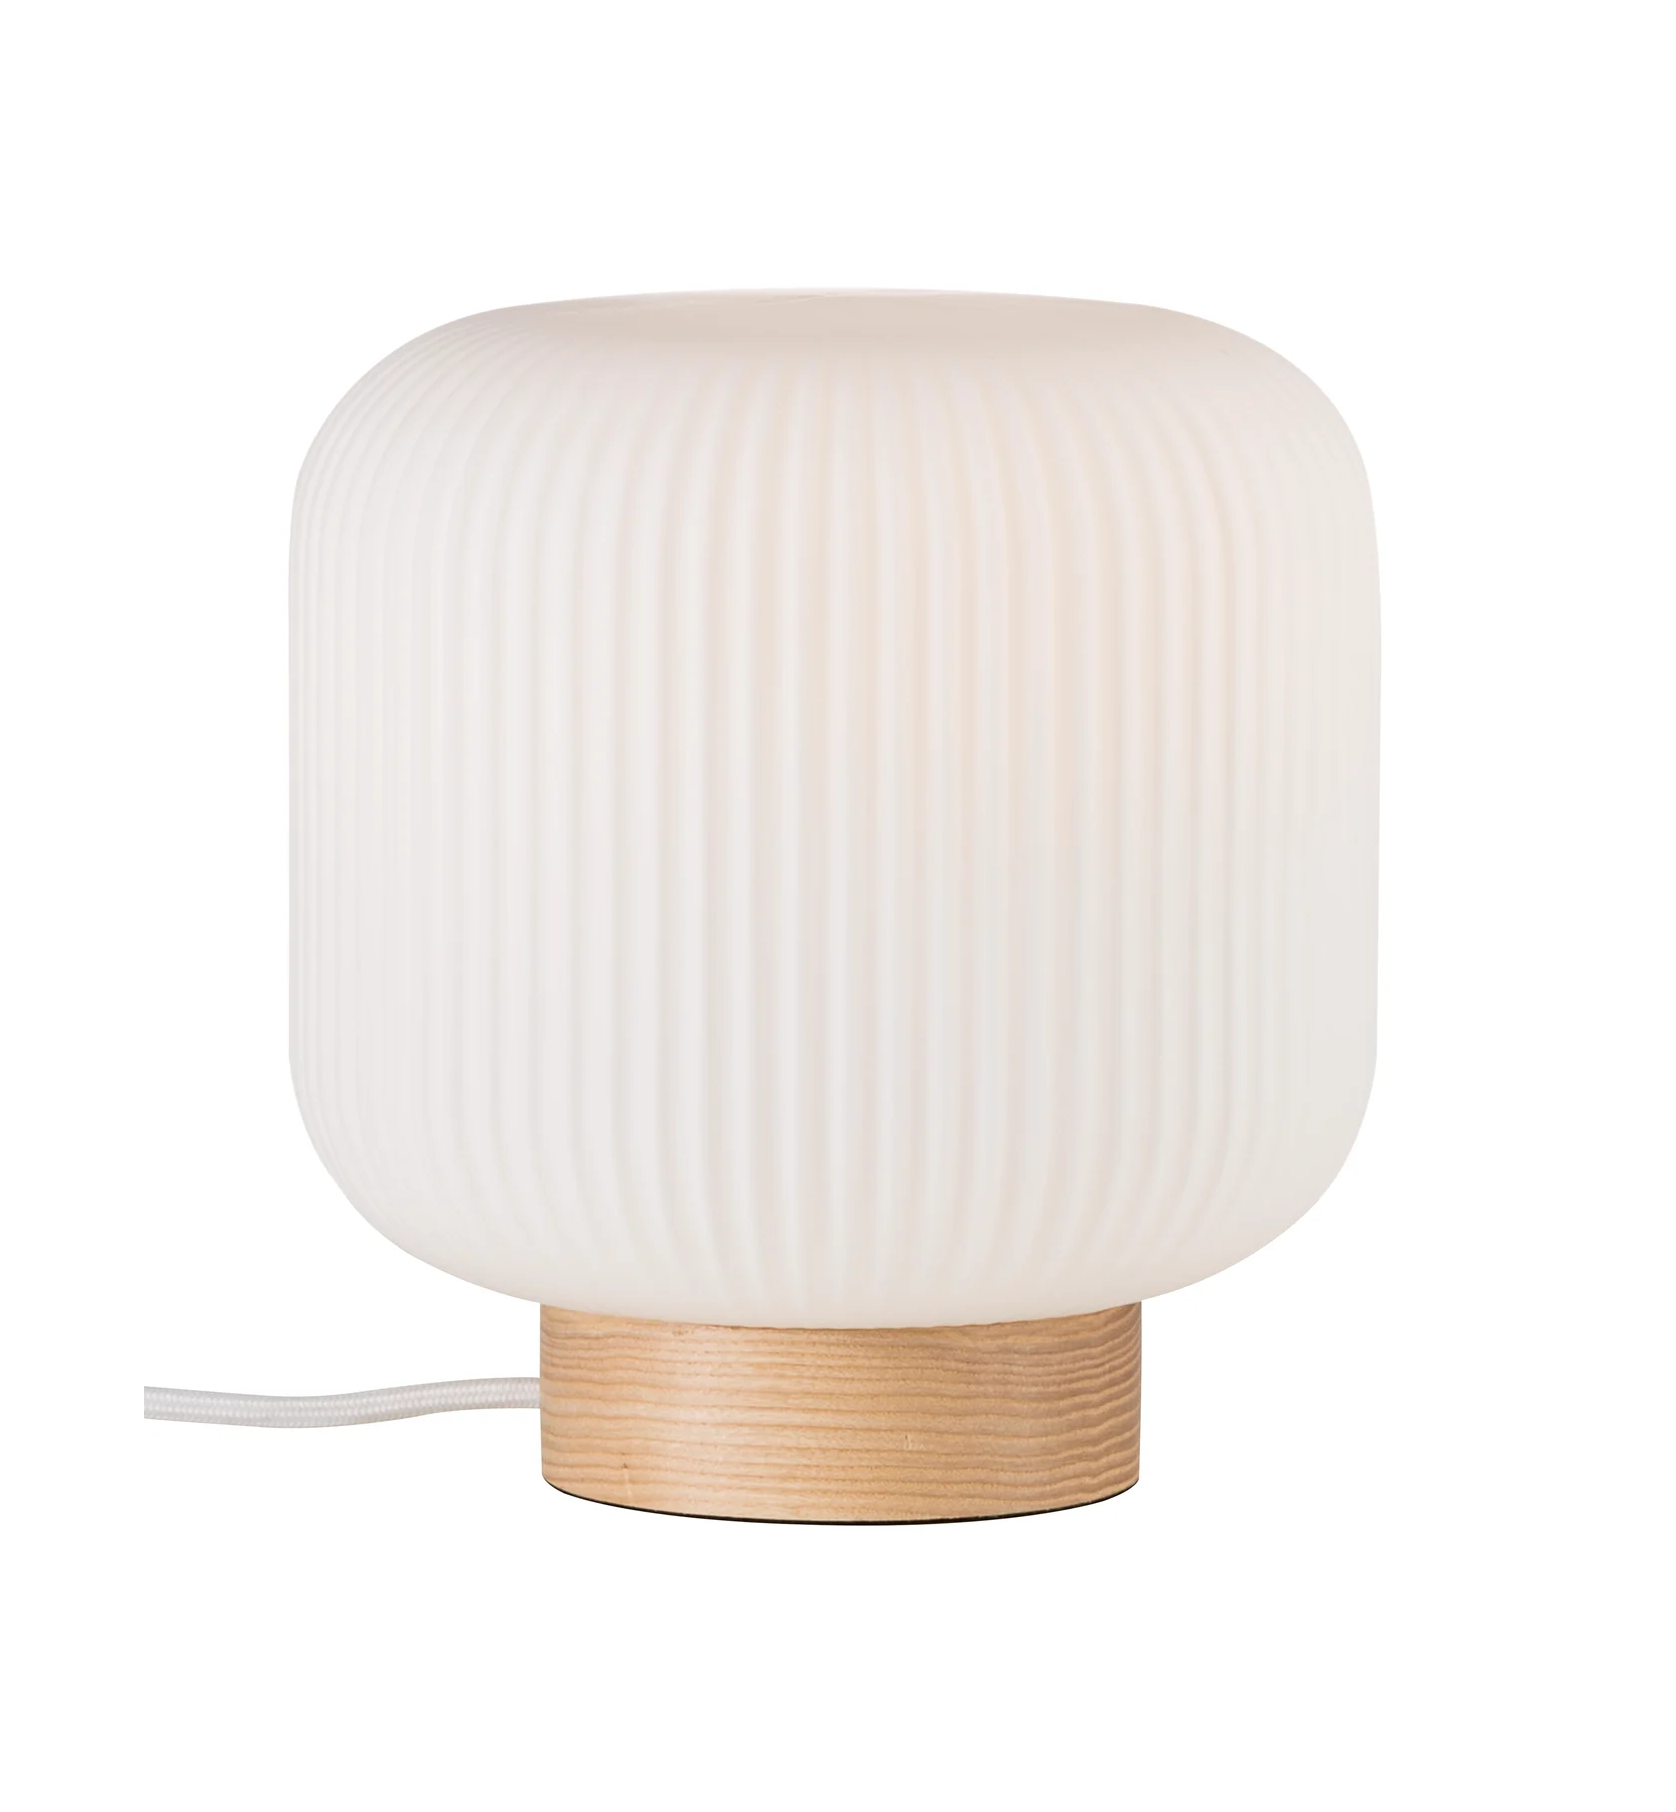 MILFORD wooden table lamp